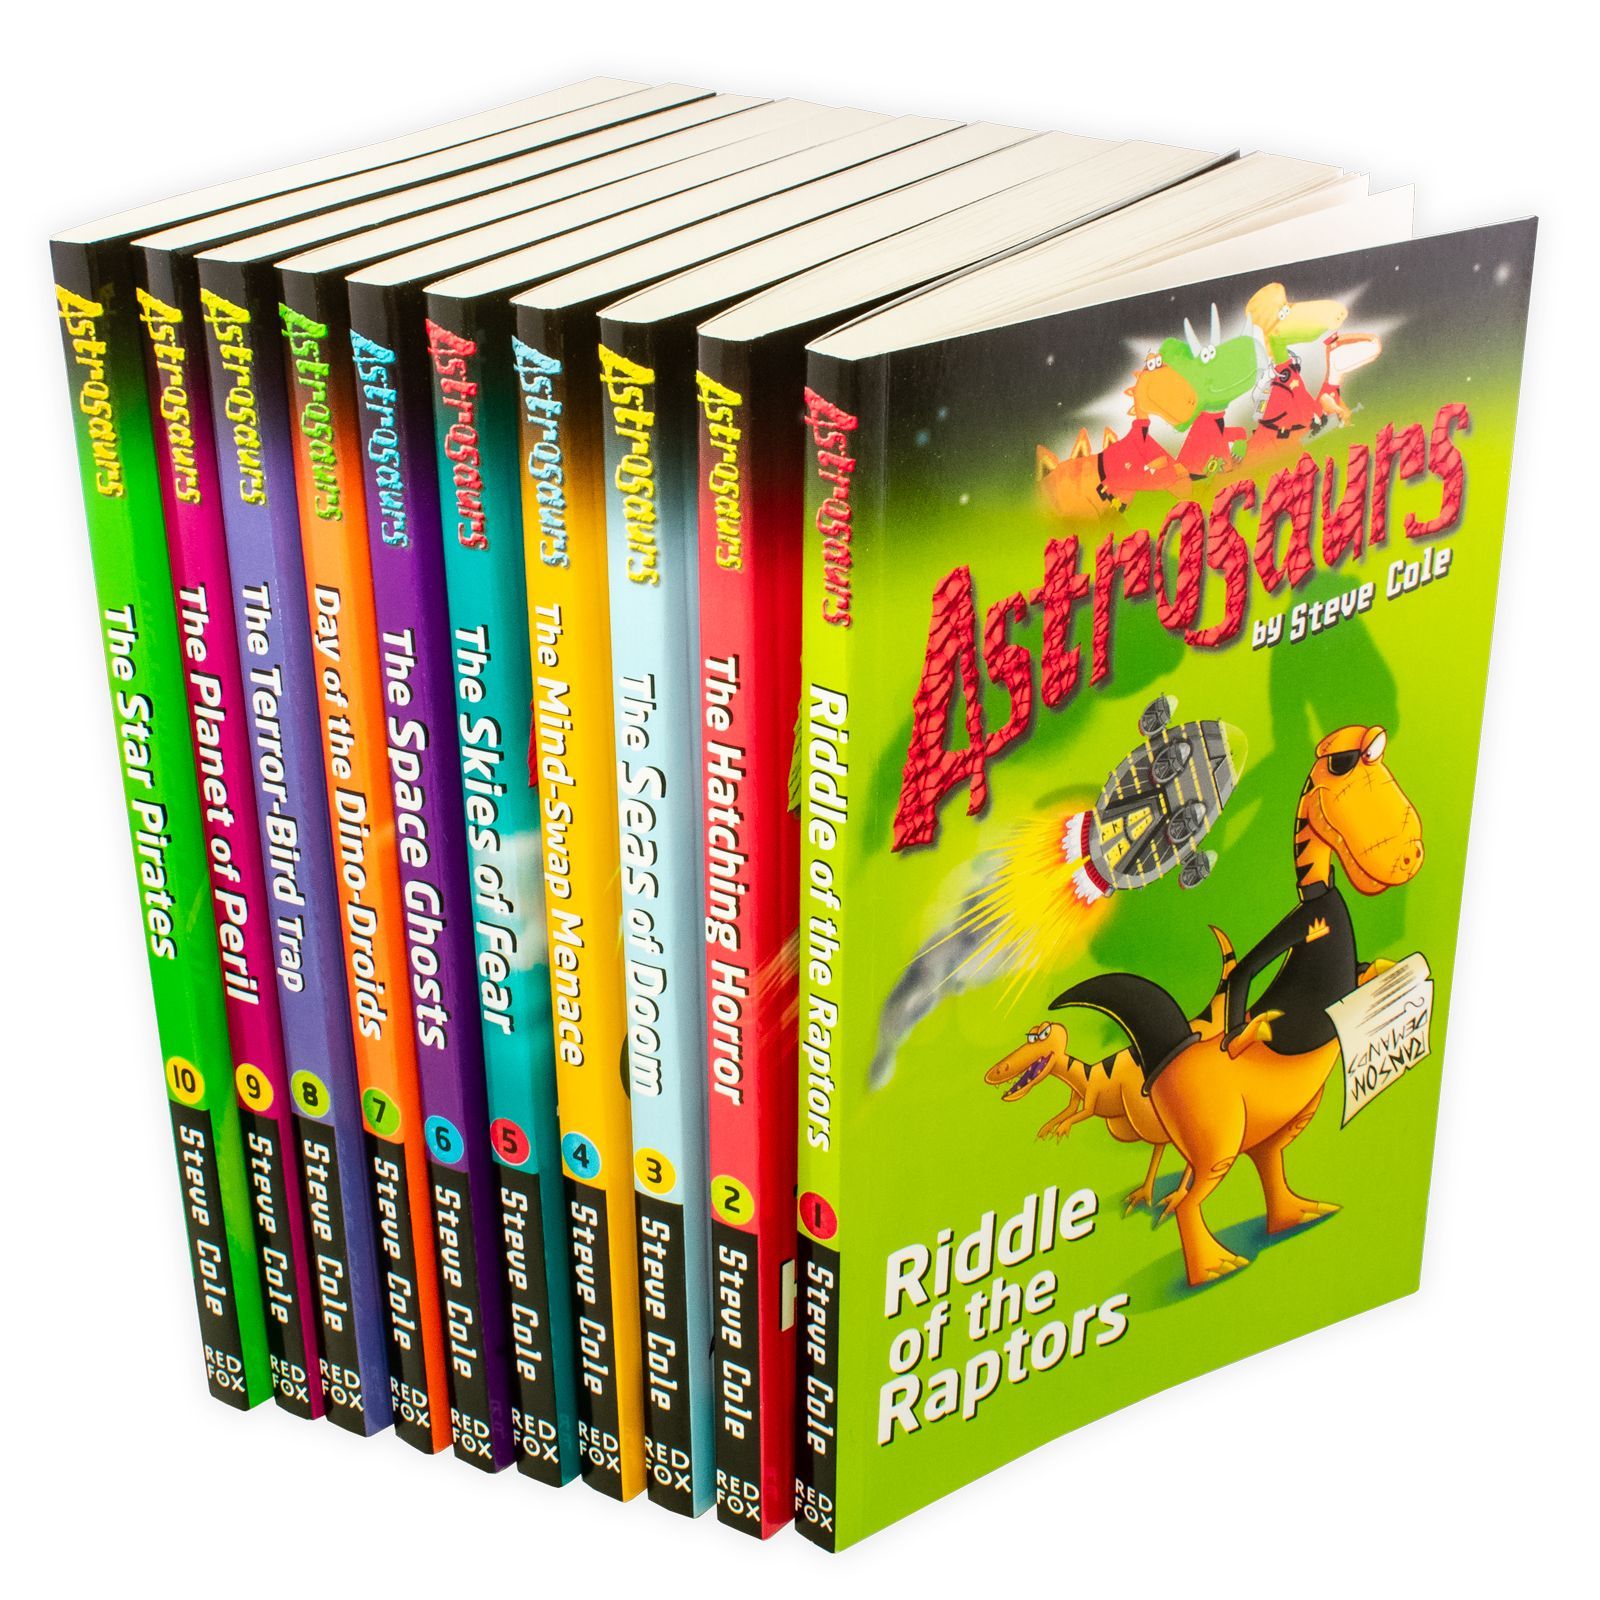 Astrosaurs Series 10 Books Young Adult Collection Paperback Set By Steve Cole - St Stephens Books